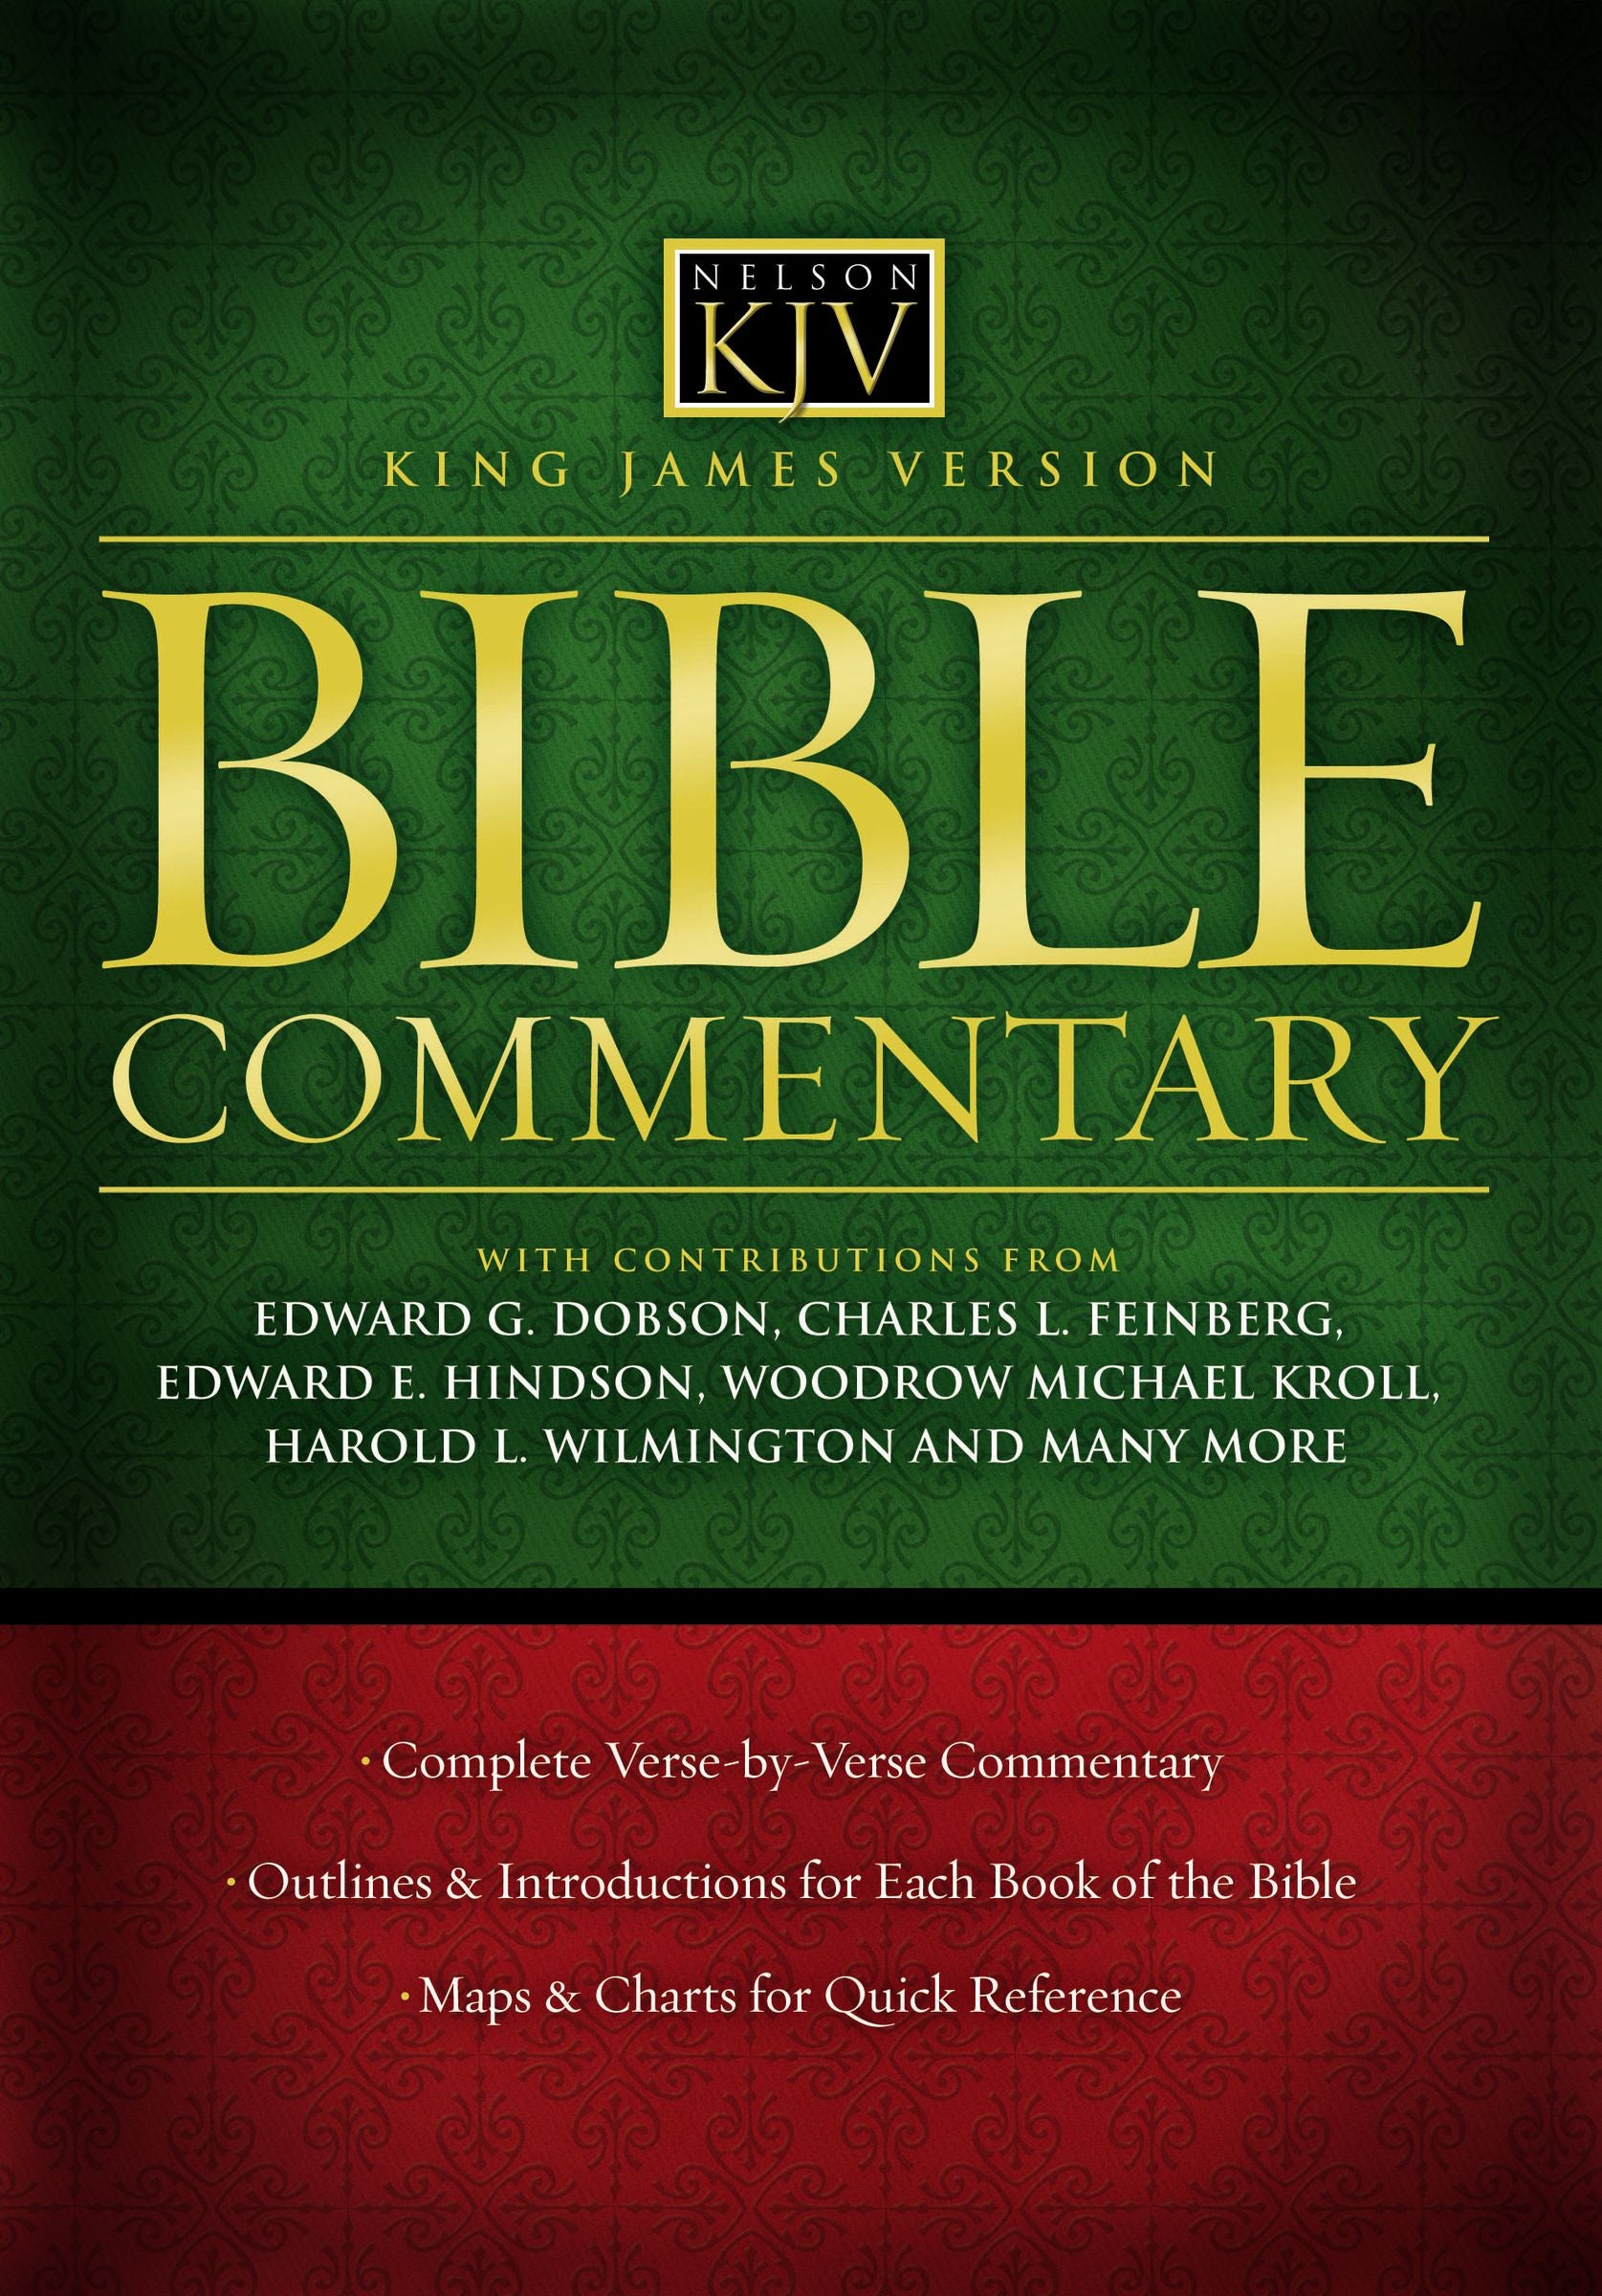 Image of Bible Commentary: King James Version other